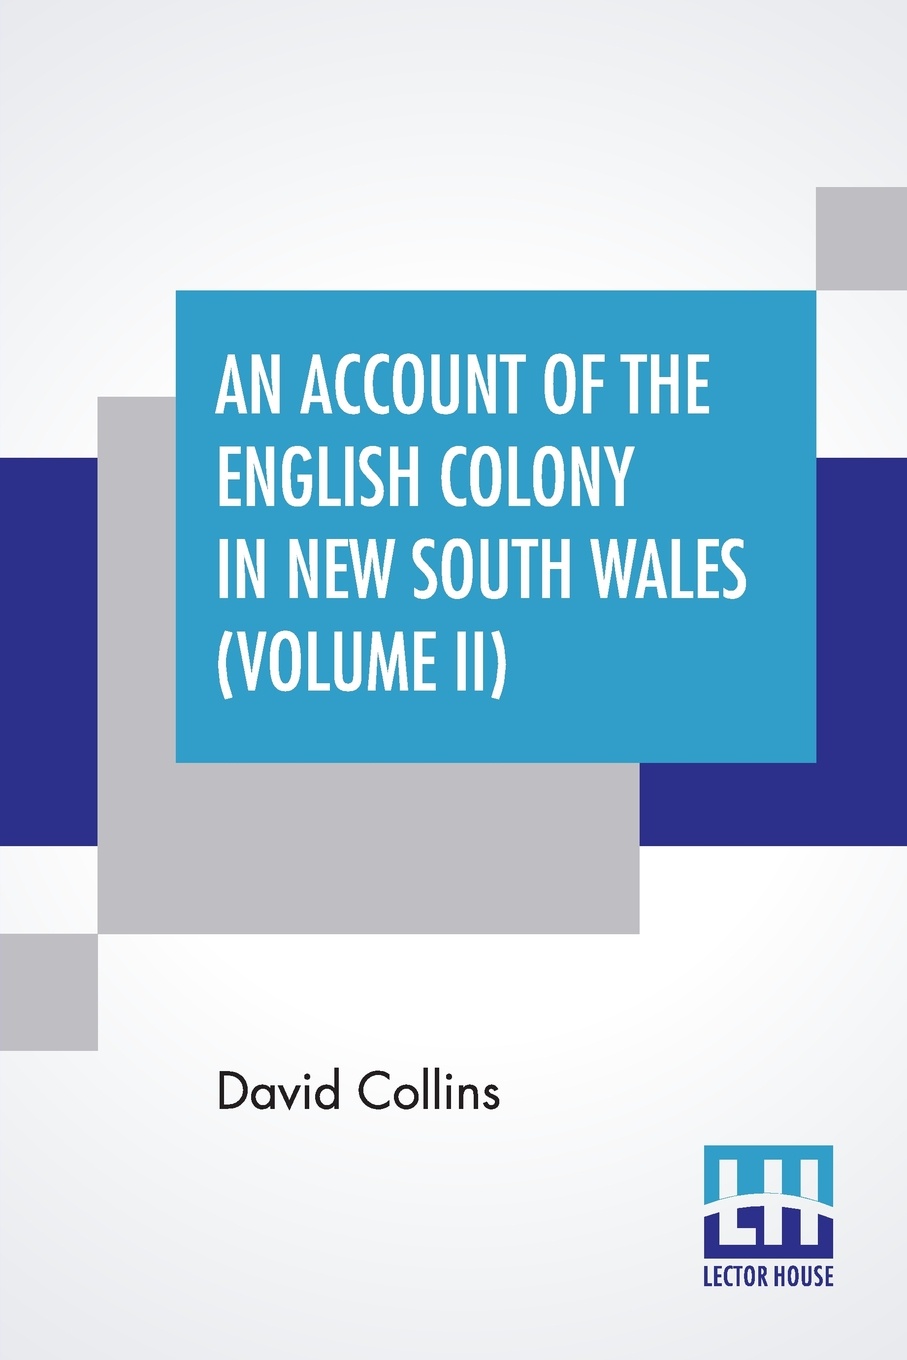 An Account Of The English Colony In New South Wales (Volume II). From Its First Settlement In 1788, To August 1801 - With Remarks On The Dispositions, Customs, Manners, Etc. Of The Native Inhabitants Of That Country. To Which Are Added, Some Parti...